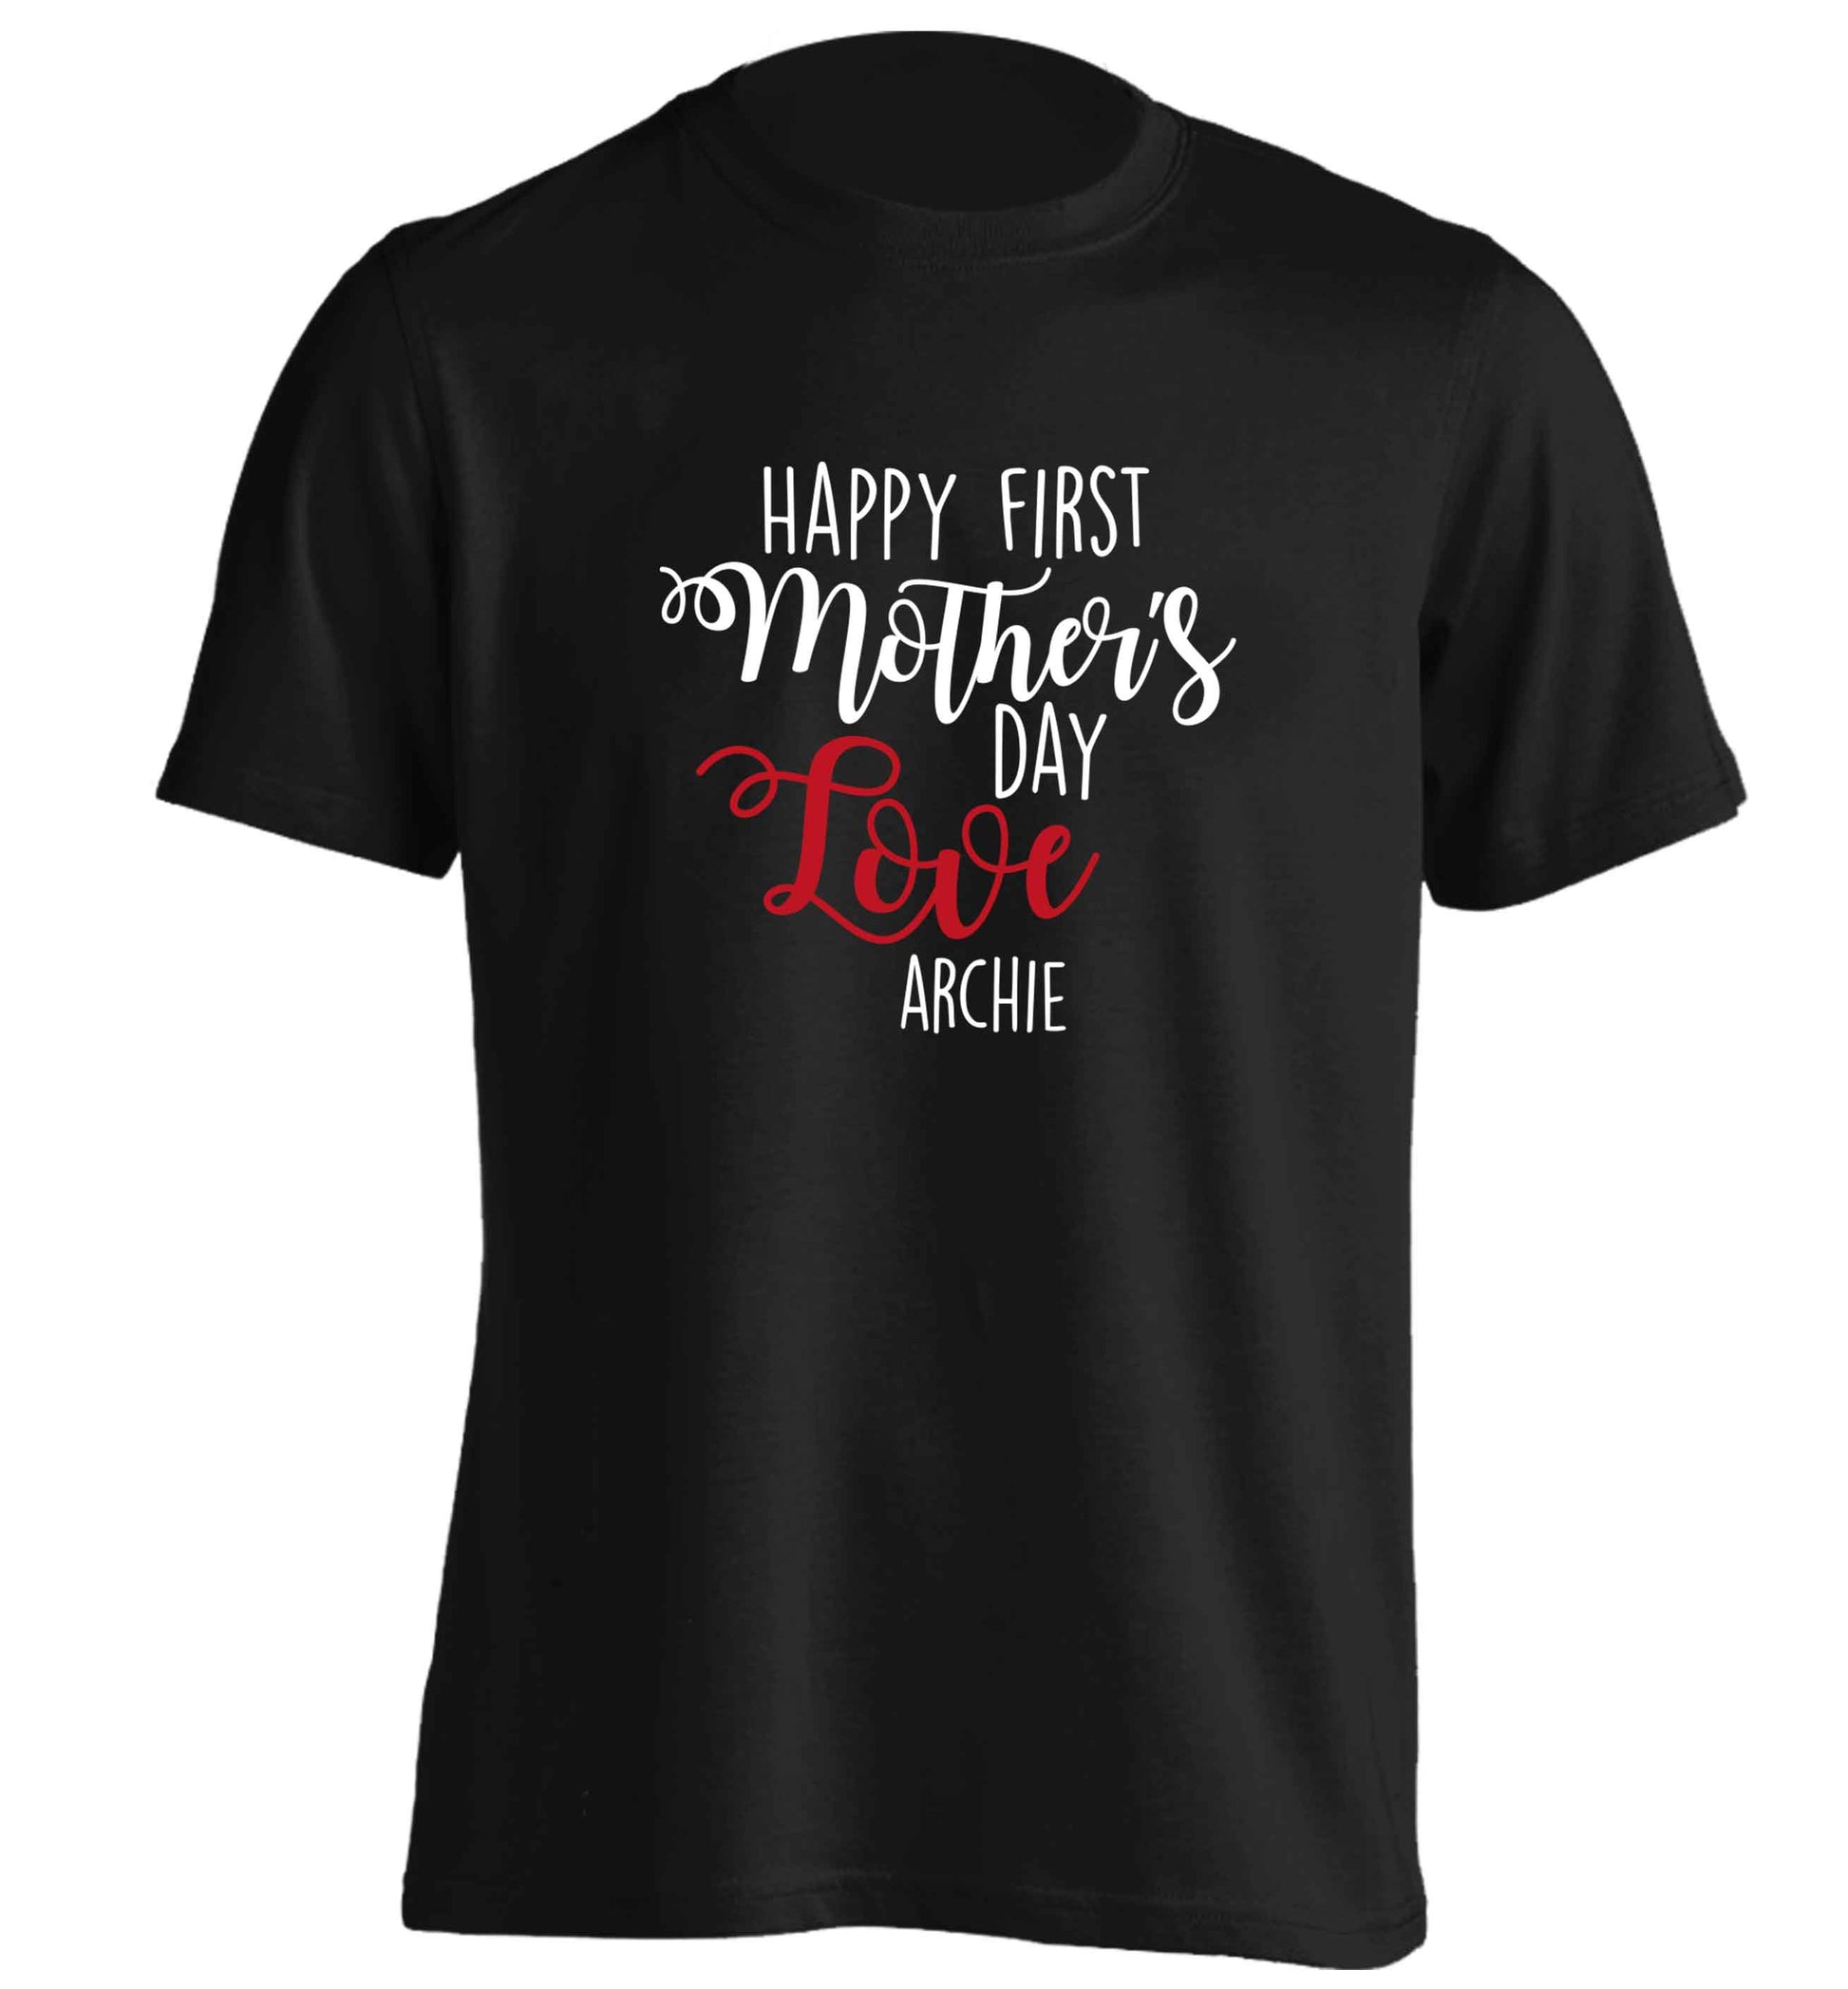 Mummy's first mother's day! adults unisex black Tshirt 2XL